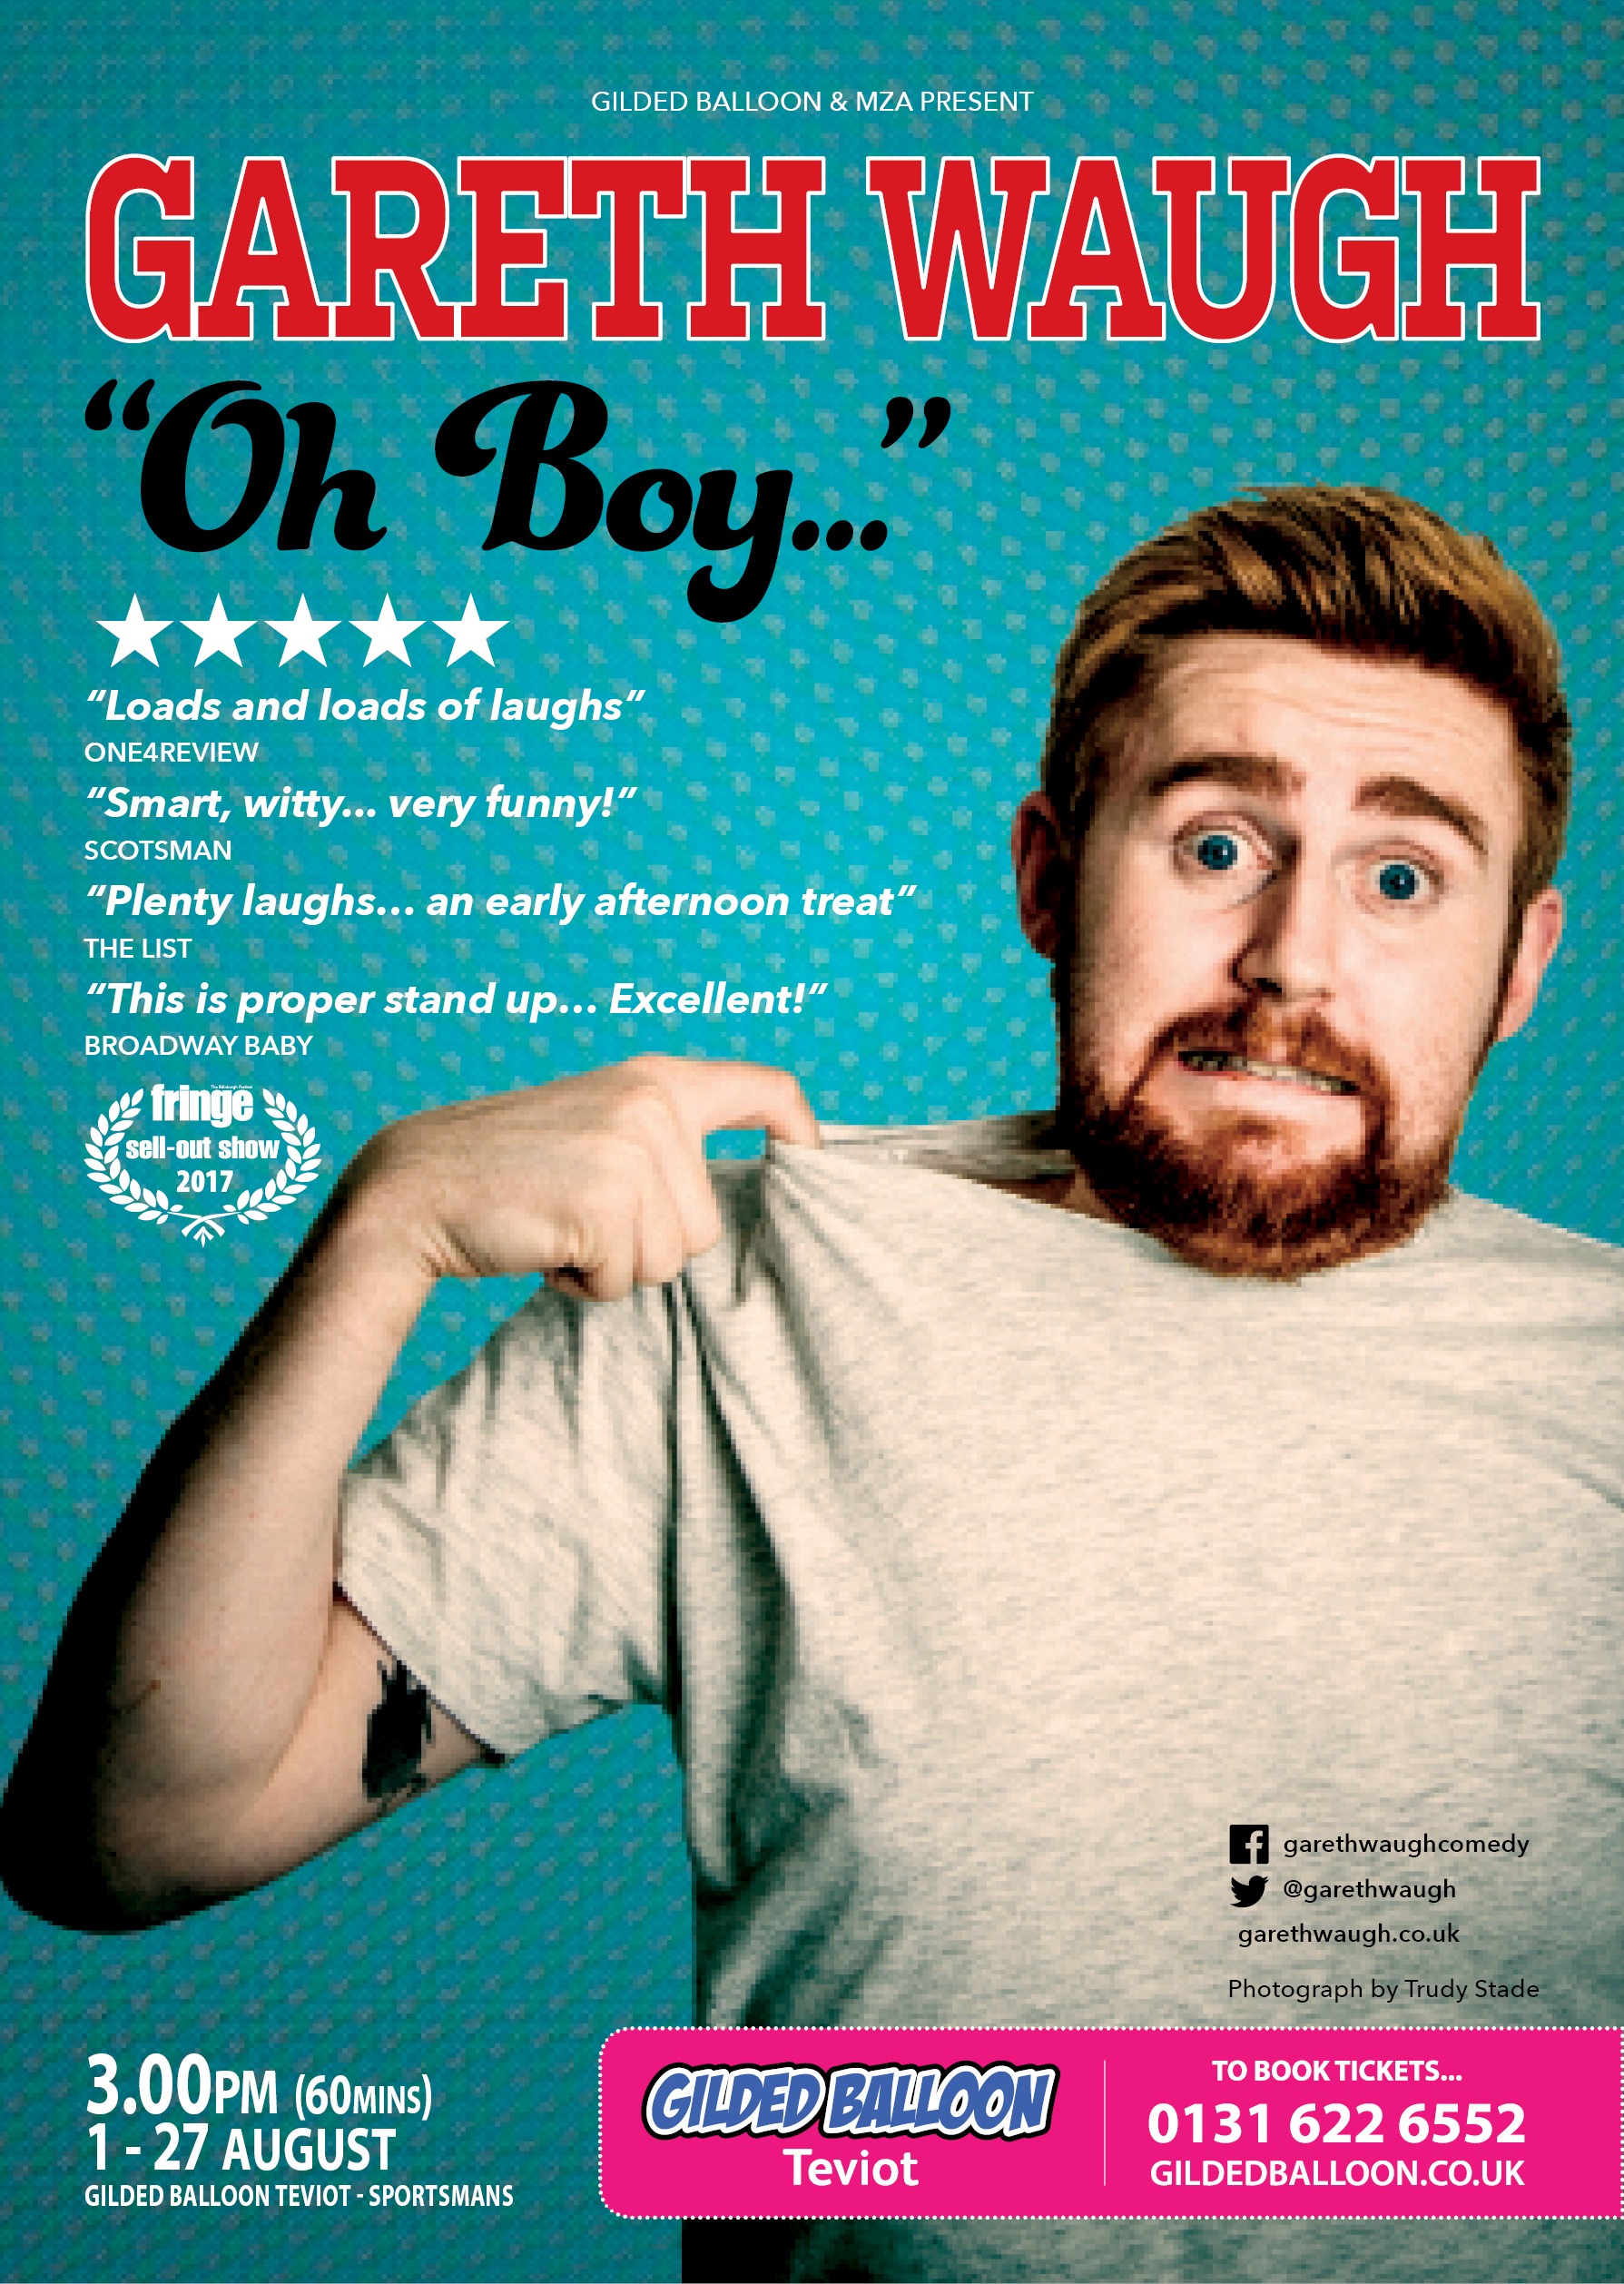 The poster for Gareth Waugh: Oh Boy...!